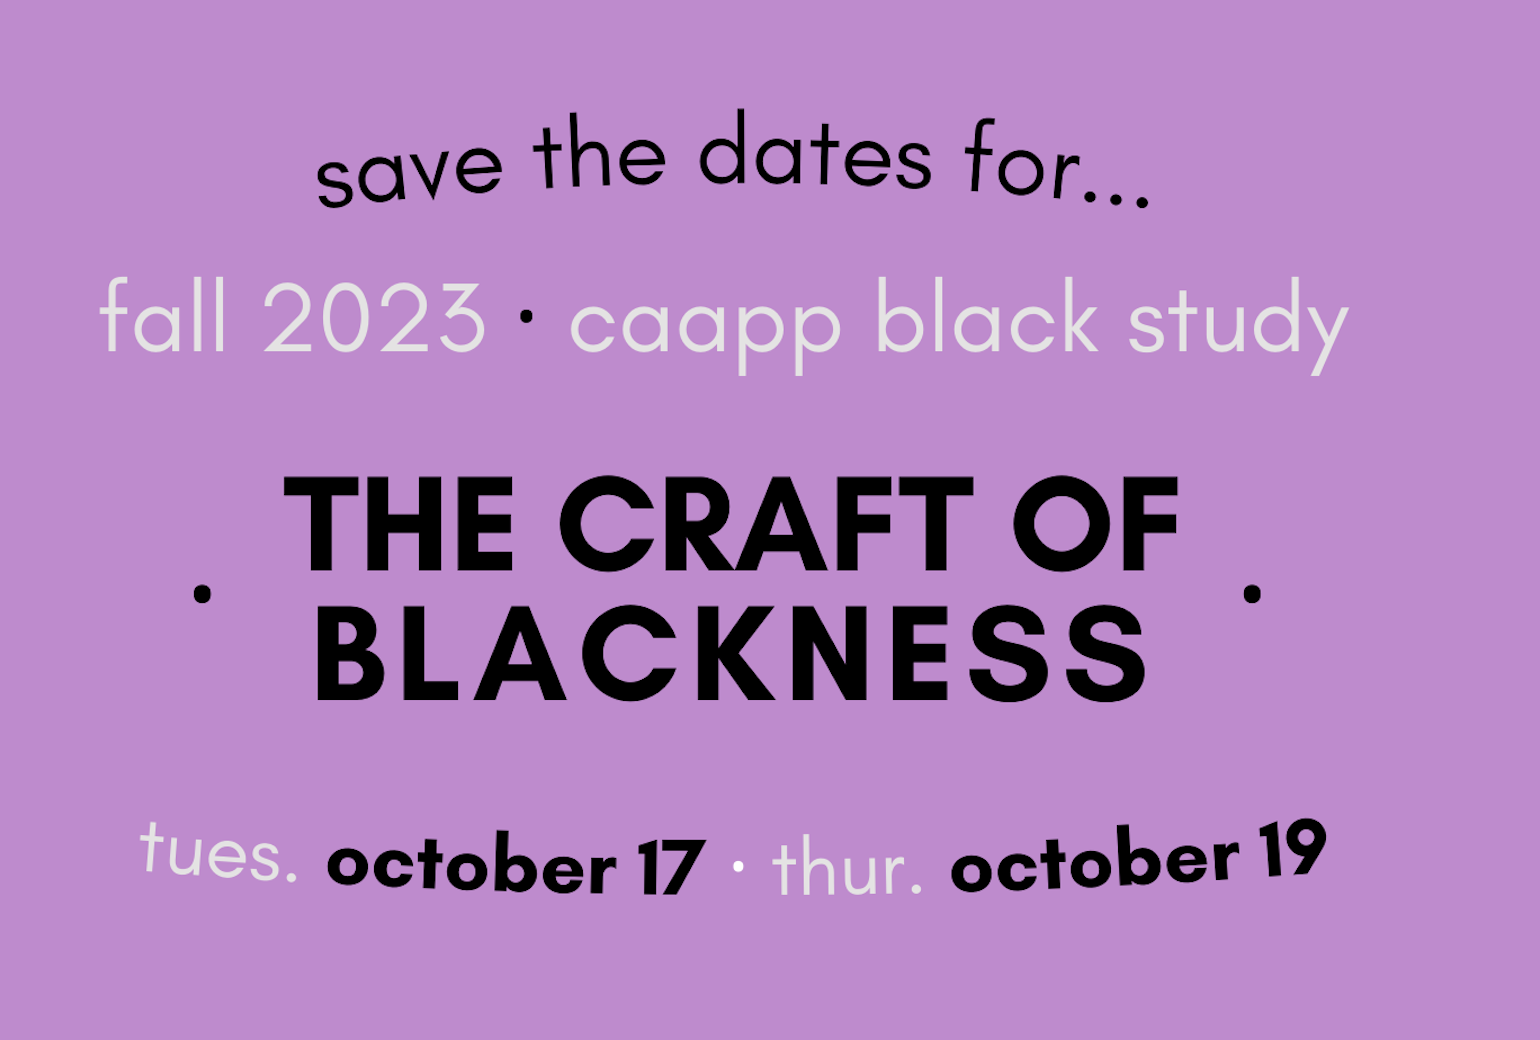 Save the dates for... fall 2023 CAAPP Black Study The Craft of Blackness, Tuesday October 17 Thursday & October 19